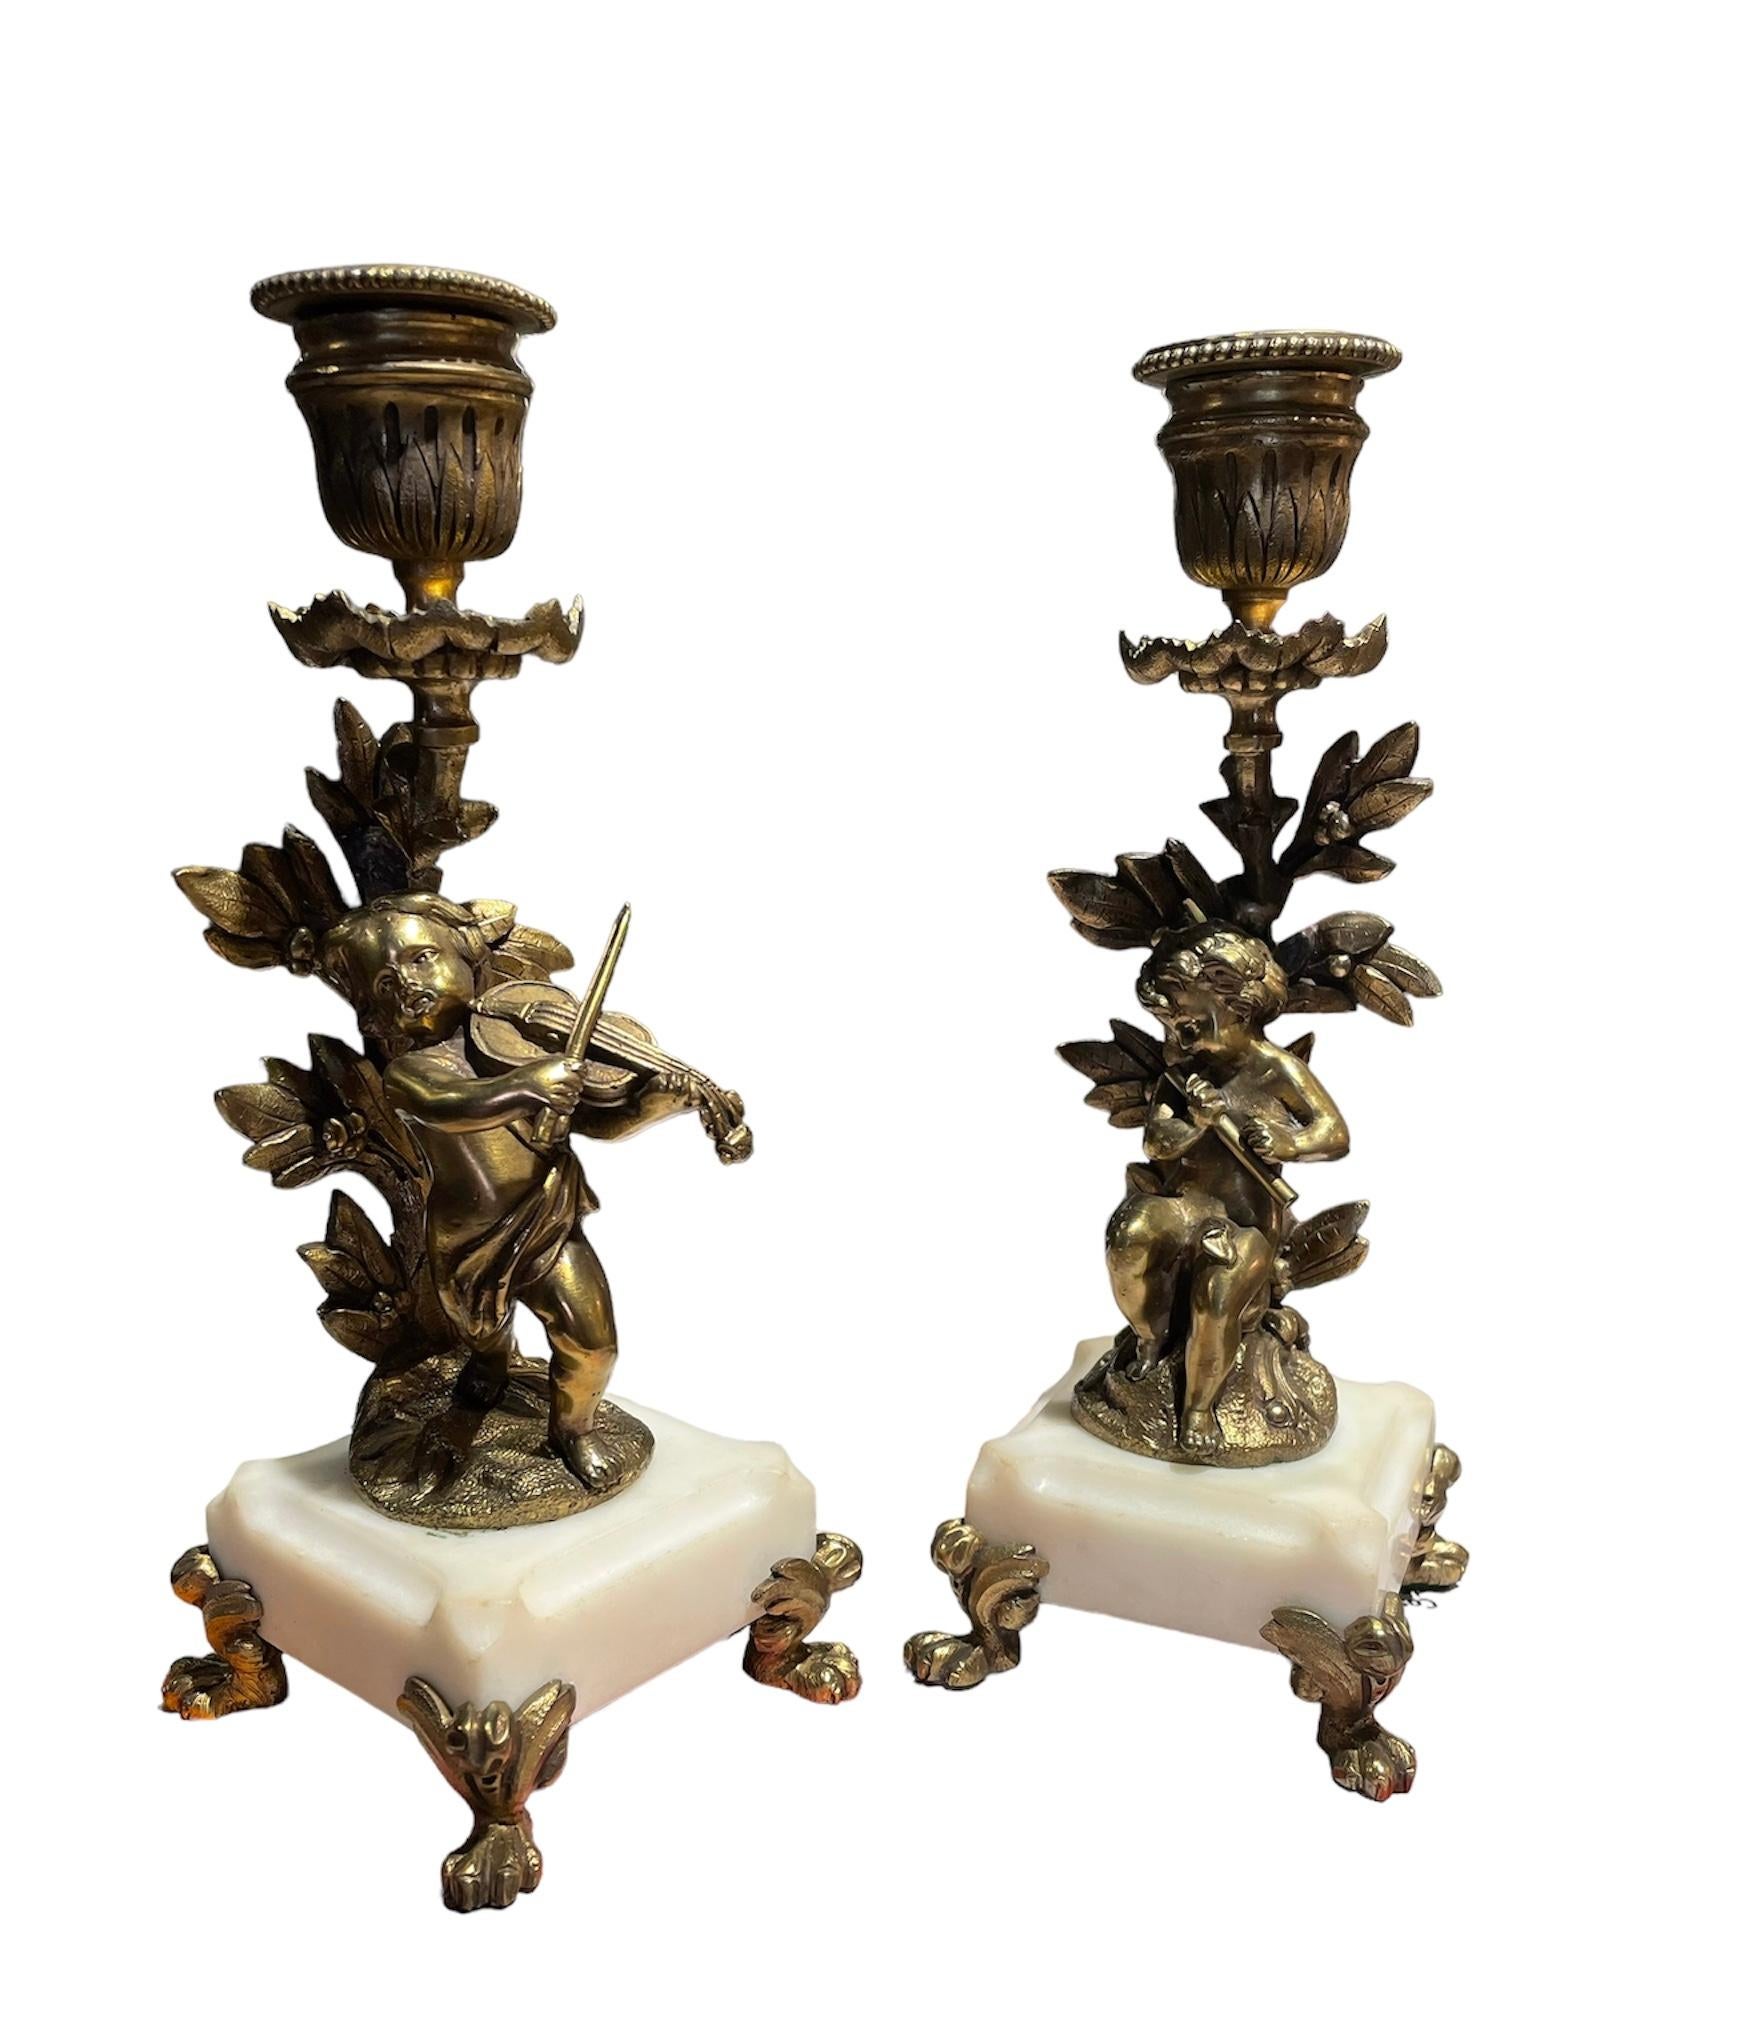 This is a pair of gilt bronze candle holders. Each one of them depicts a cherub figure who is playing an instrument in front of a bay leaves tree. One is playing the violin and the other one the flute. From one of the bay leaves branches come out